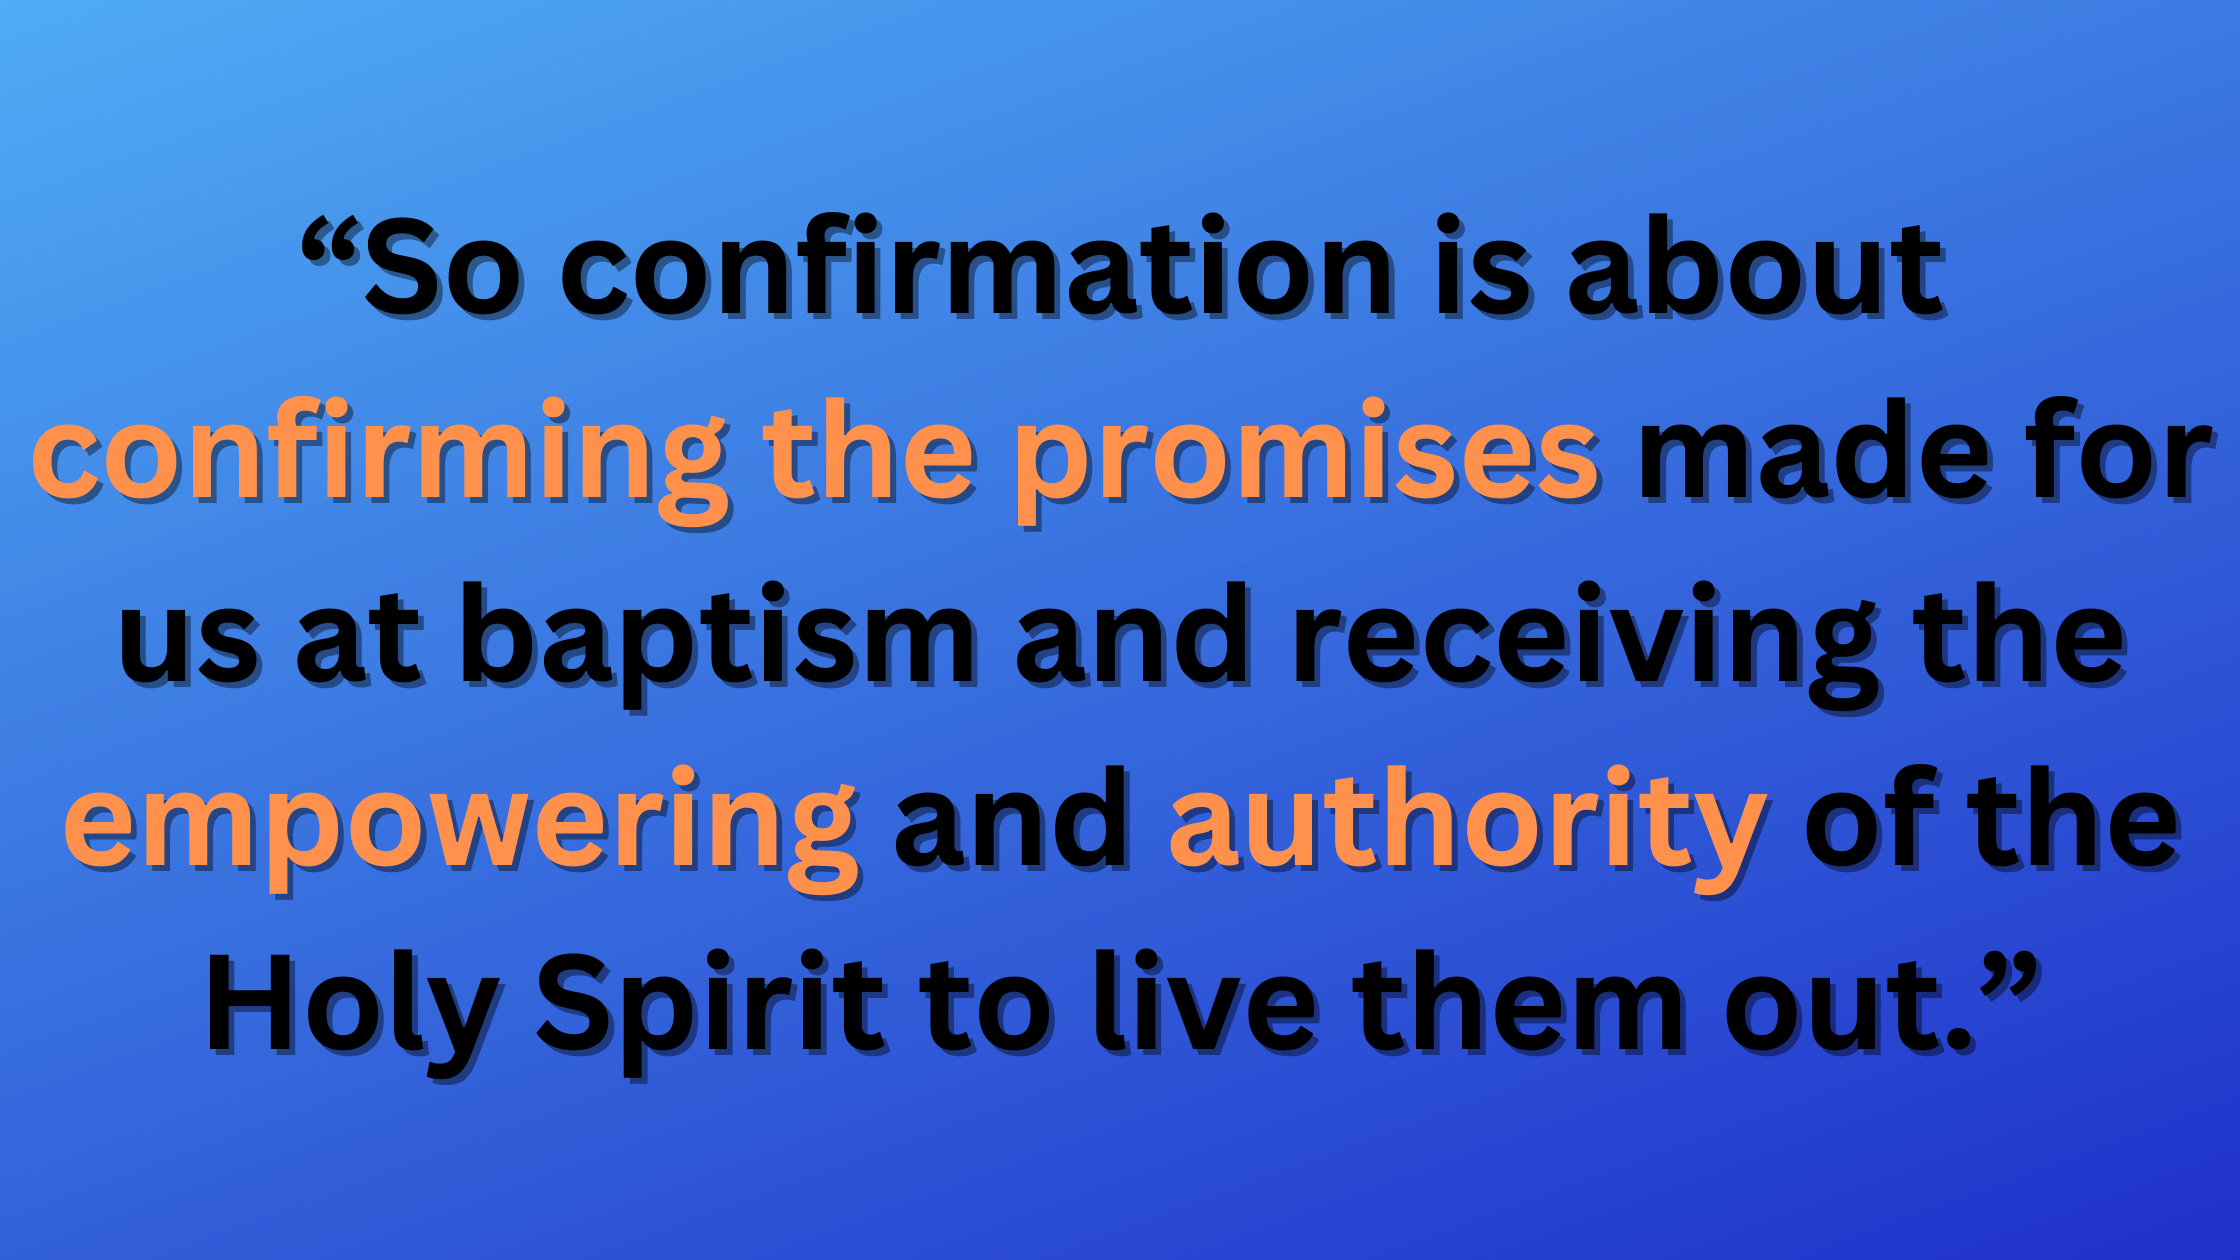 So confirmation is about confirming the promises made for us at baptism and receiving the empowering and authority of the Holy Spirit to live them out